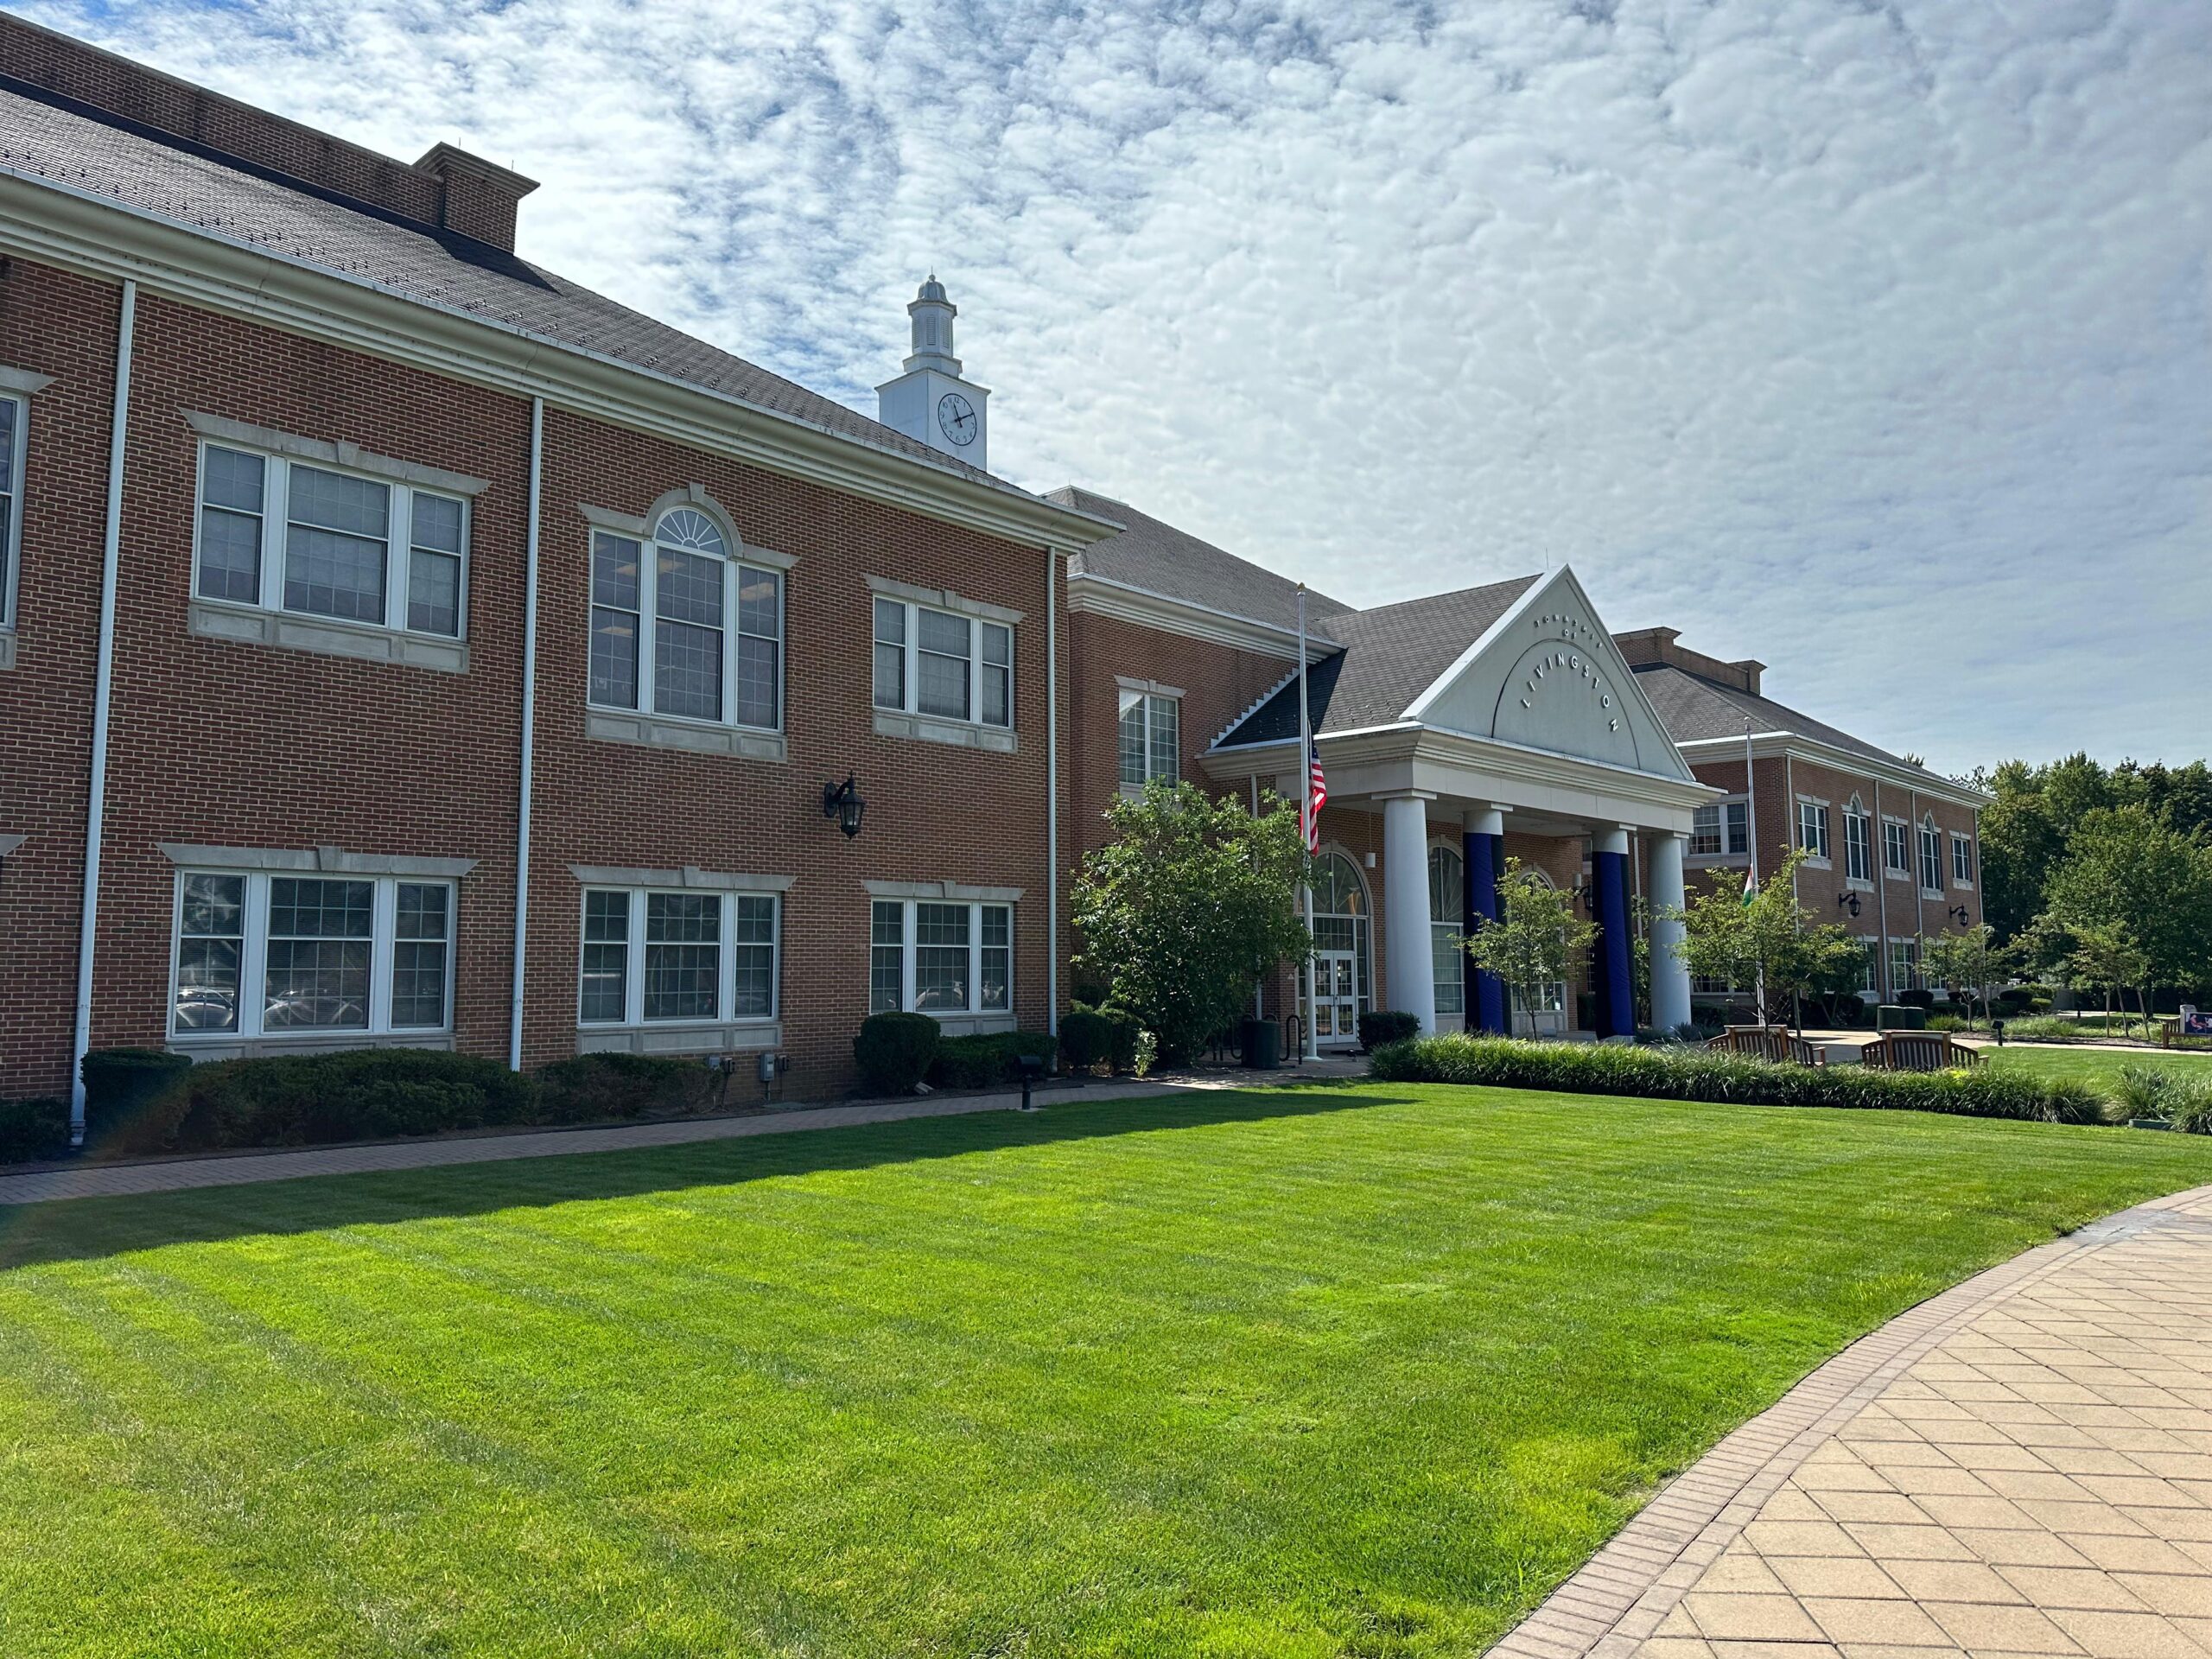 A large brick building with a lawn and trees and the windows are perfectly cleaned by Clarke's Service Professionals.